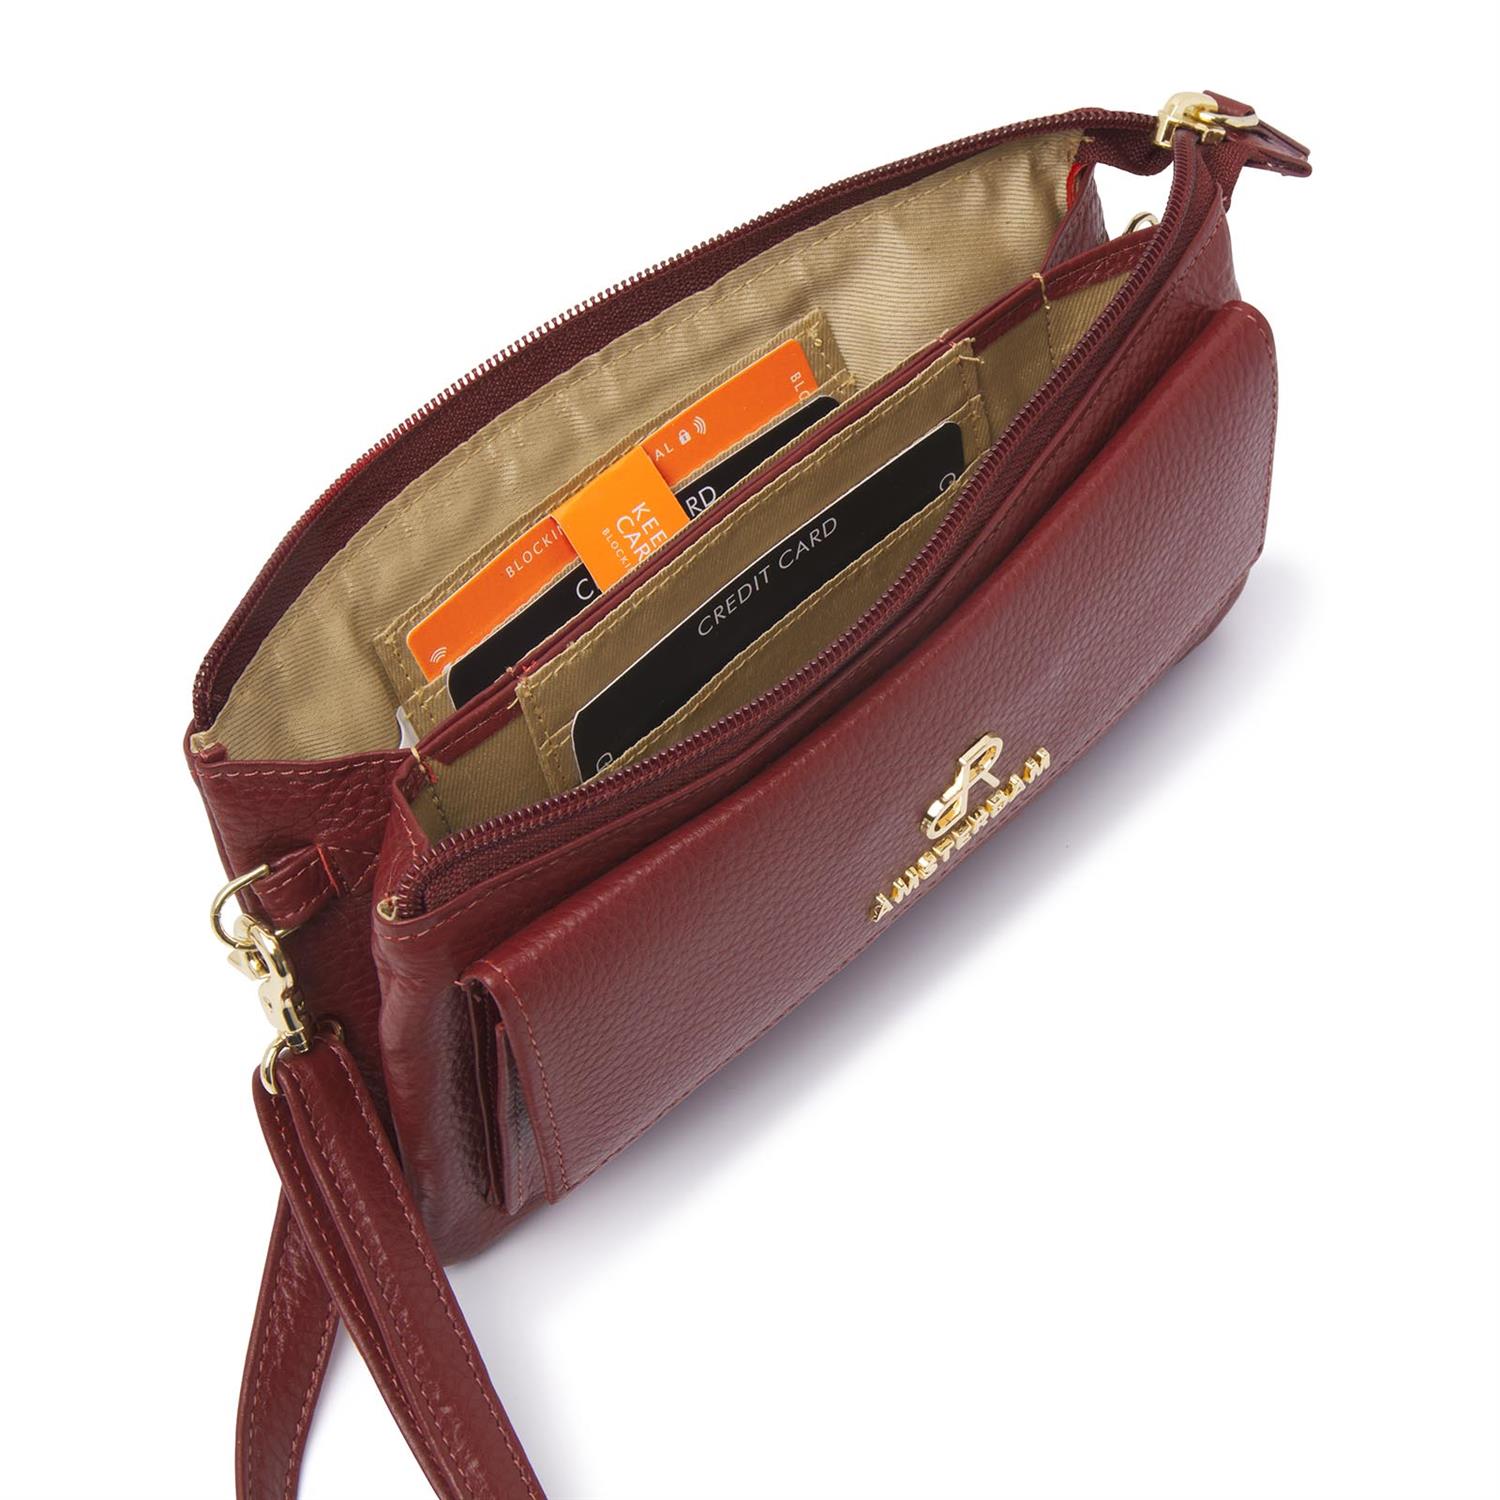 Smeltend Lake Taupo Streng dR Amsterdam Shoulderbag / Clutch - Clutches - Ladies Bags - dR Amsterdam